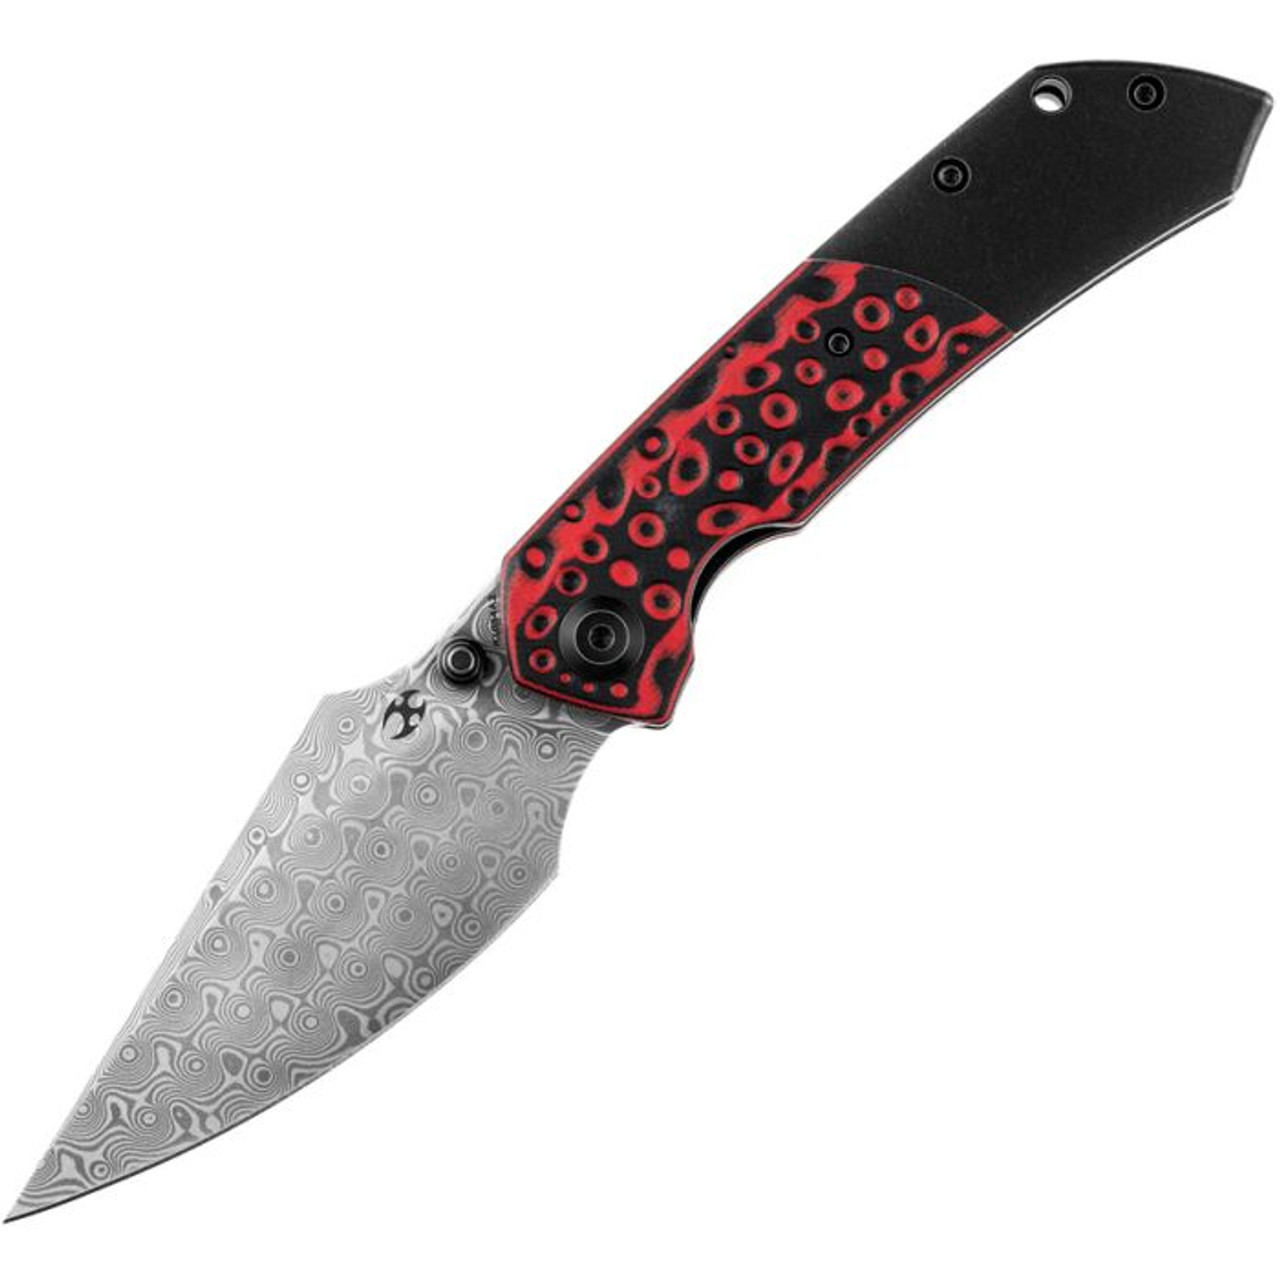 Kansept Knives Fenrir (K1034A2) 3.48" Damascus Drop Point Plain Blade, Black Titanium Handle with Black and Red Swirl G-10 Inlay